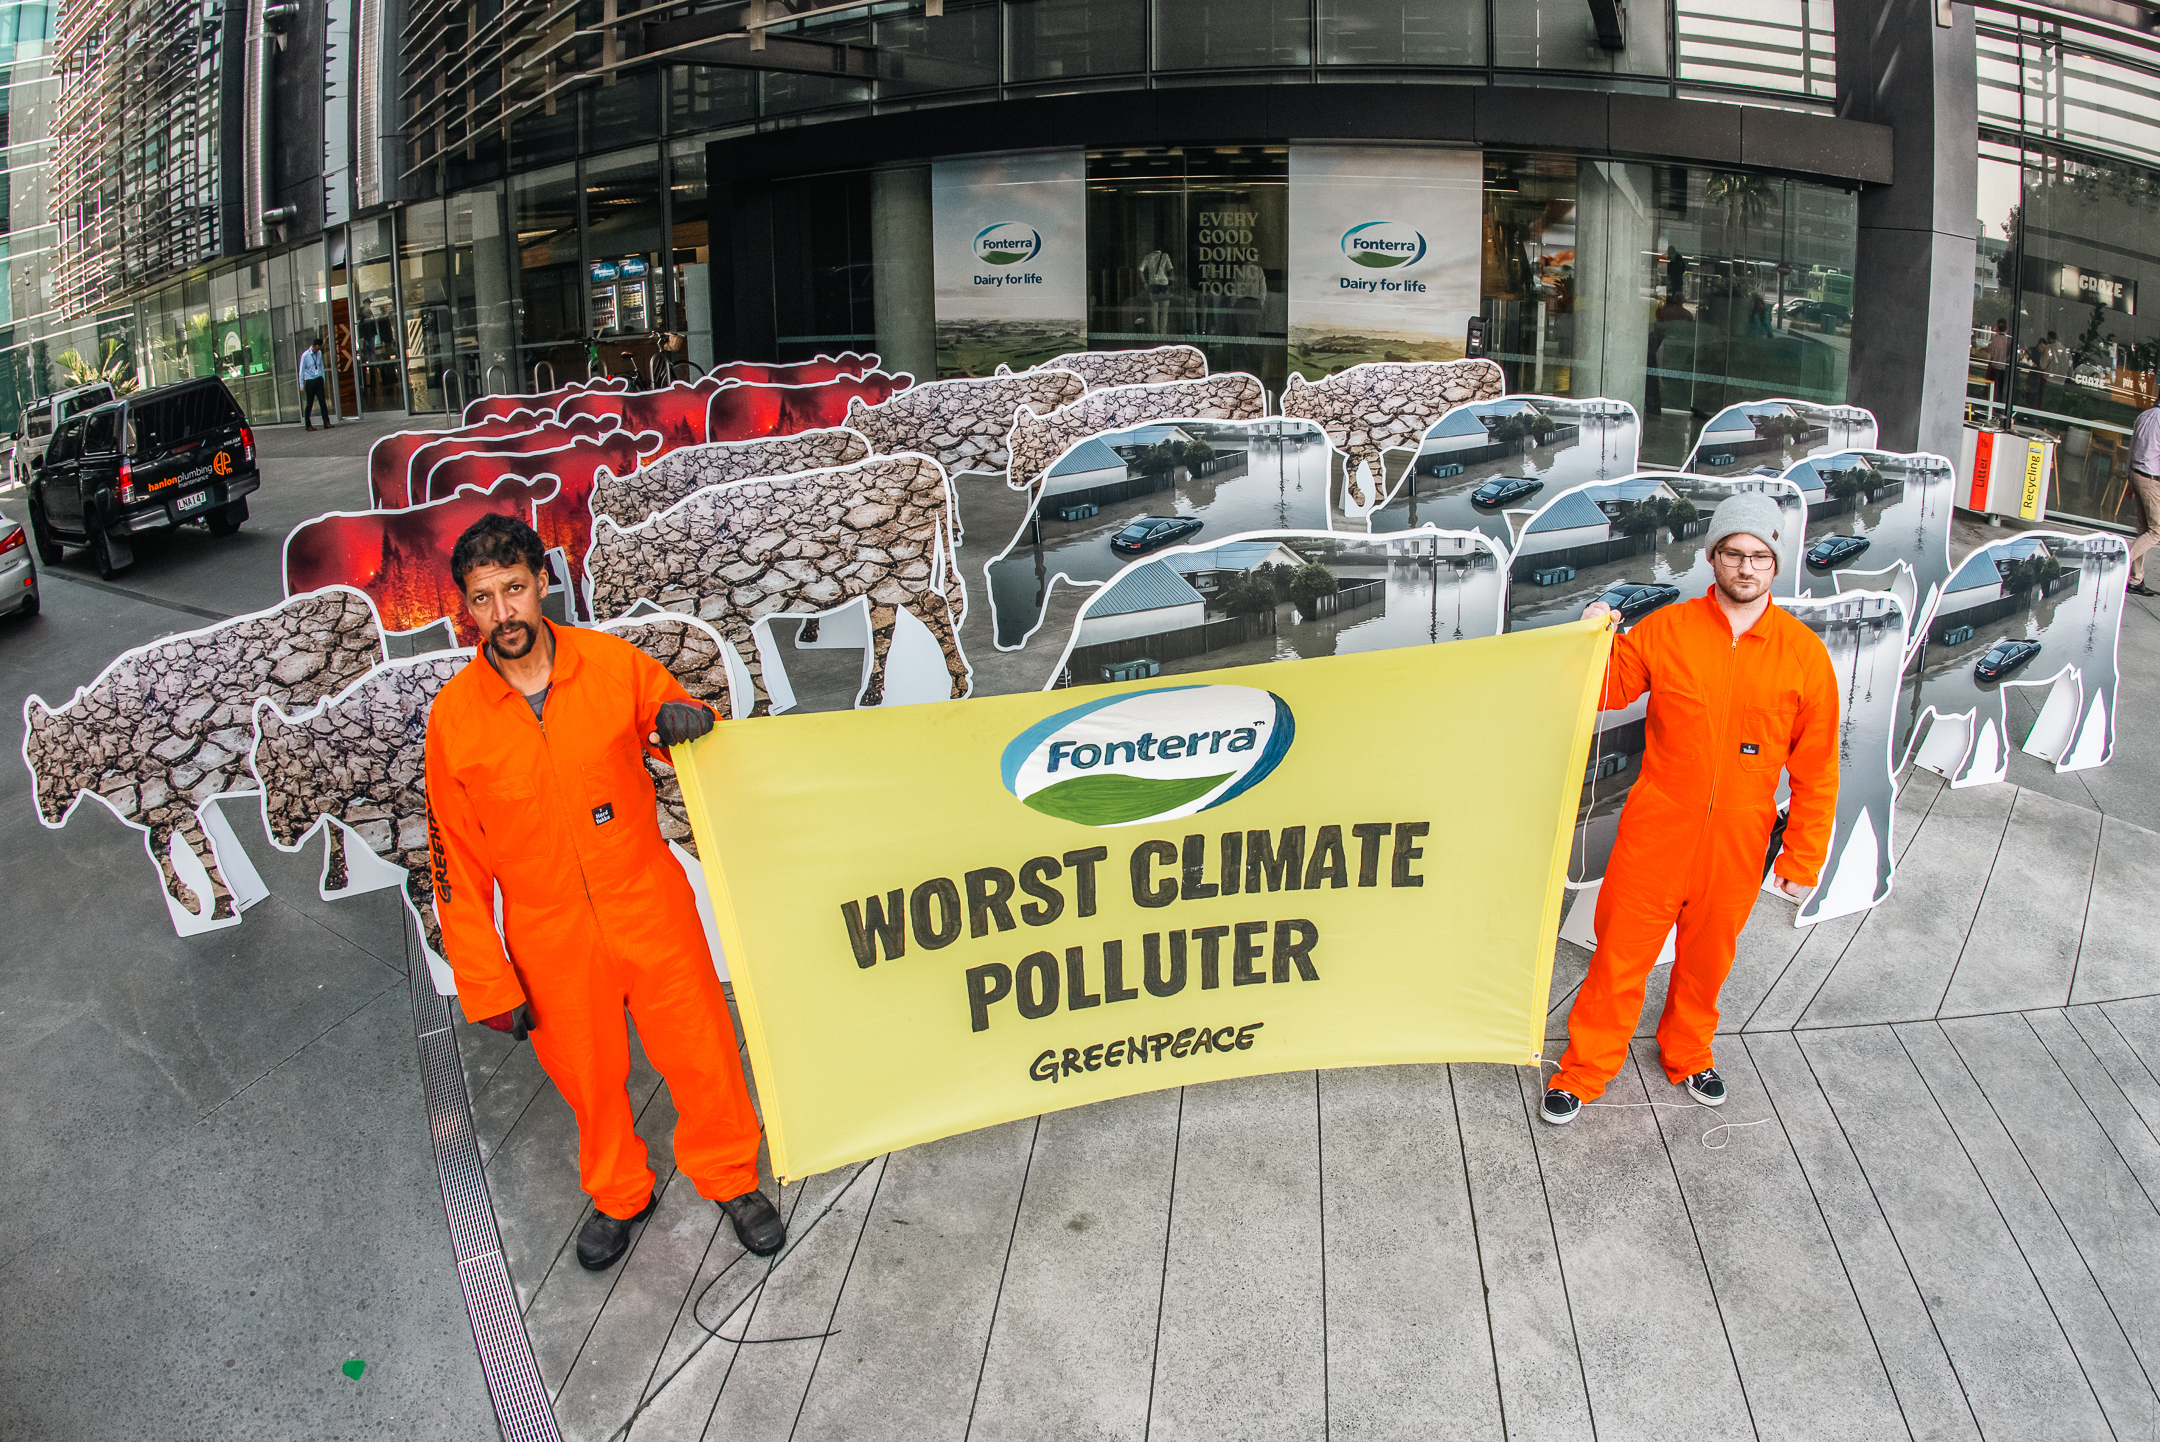 Greenpeace activists corralled a herd of ‘disaster cows’ in front of Fonterra’s Auckland HQ on the dairy giant’s annual reporting day as the dairy giant announced an increased after-tax profit of $1.577 billion compared with $583 million the previous year. The disaster cows are climate disaster images of floods, fires and droughts in the shape of cows. The banner reads Fonterra: Worst Climate Polluter.